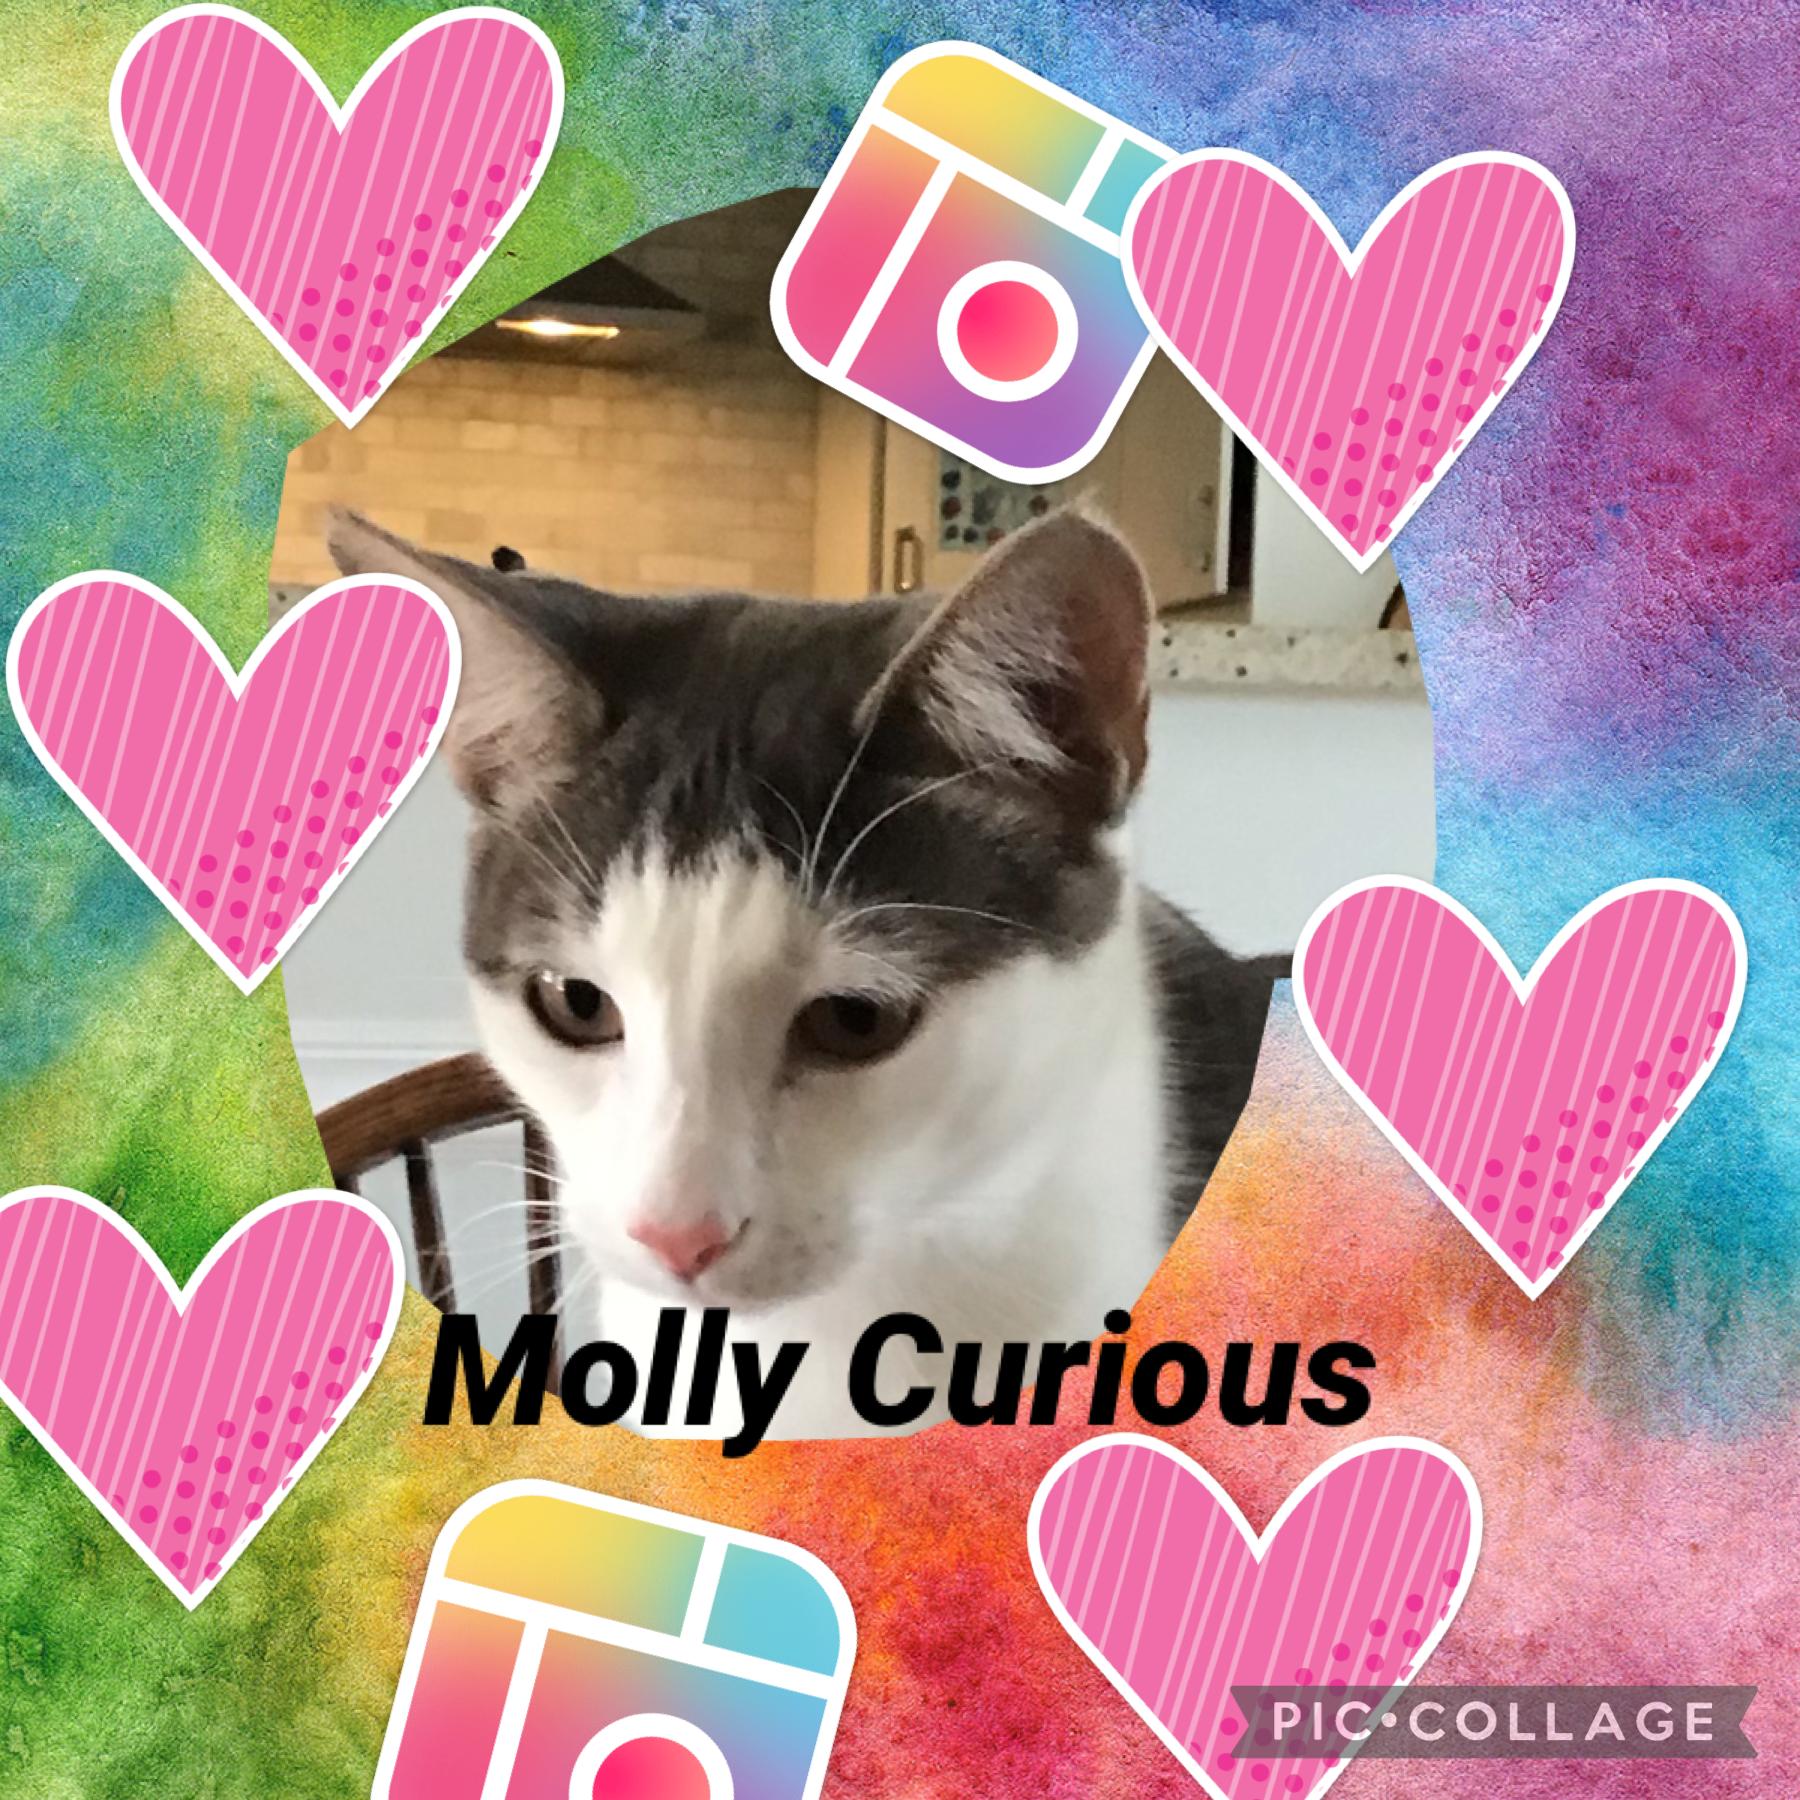 😺Tap😺

This is our PFP! If you want to make one for us to use in the future, remix and make!